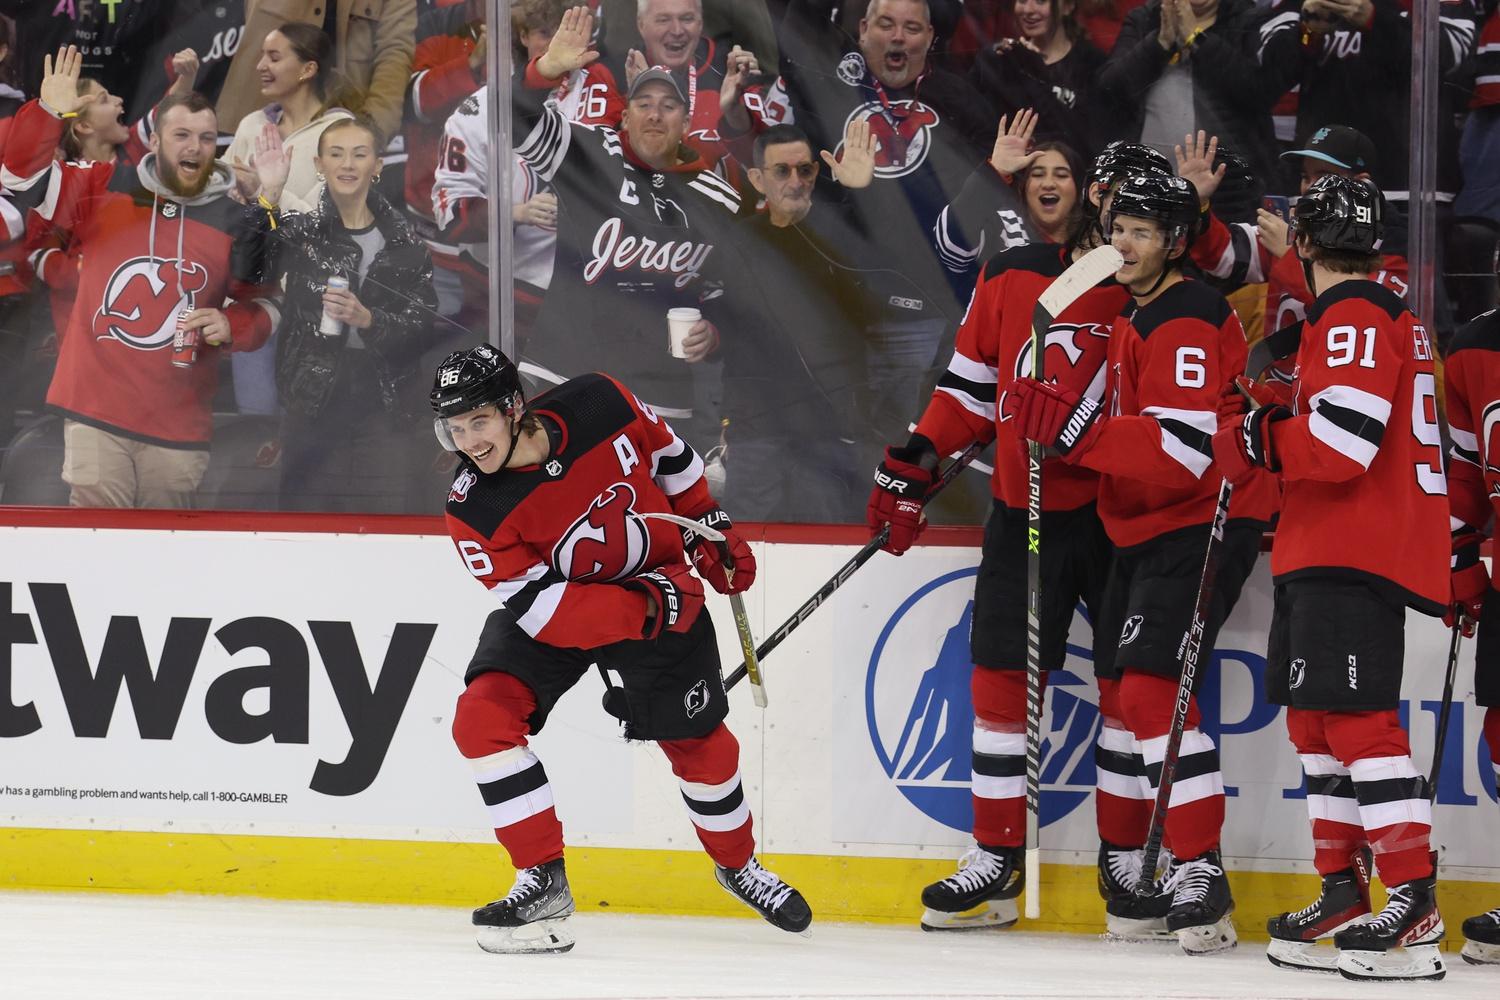 New Jersey Devils center Jack Hughes (86) celebrates his goal against the Washington Capitals during the second period at Prudential Center. / Ed Mulholland-USA TODAY Sports